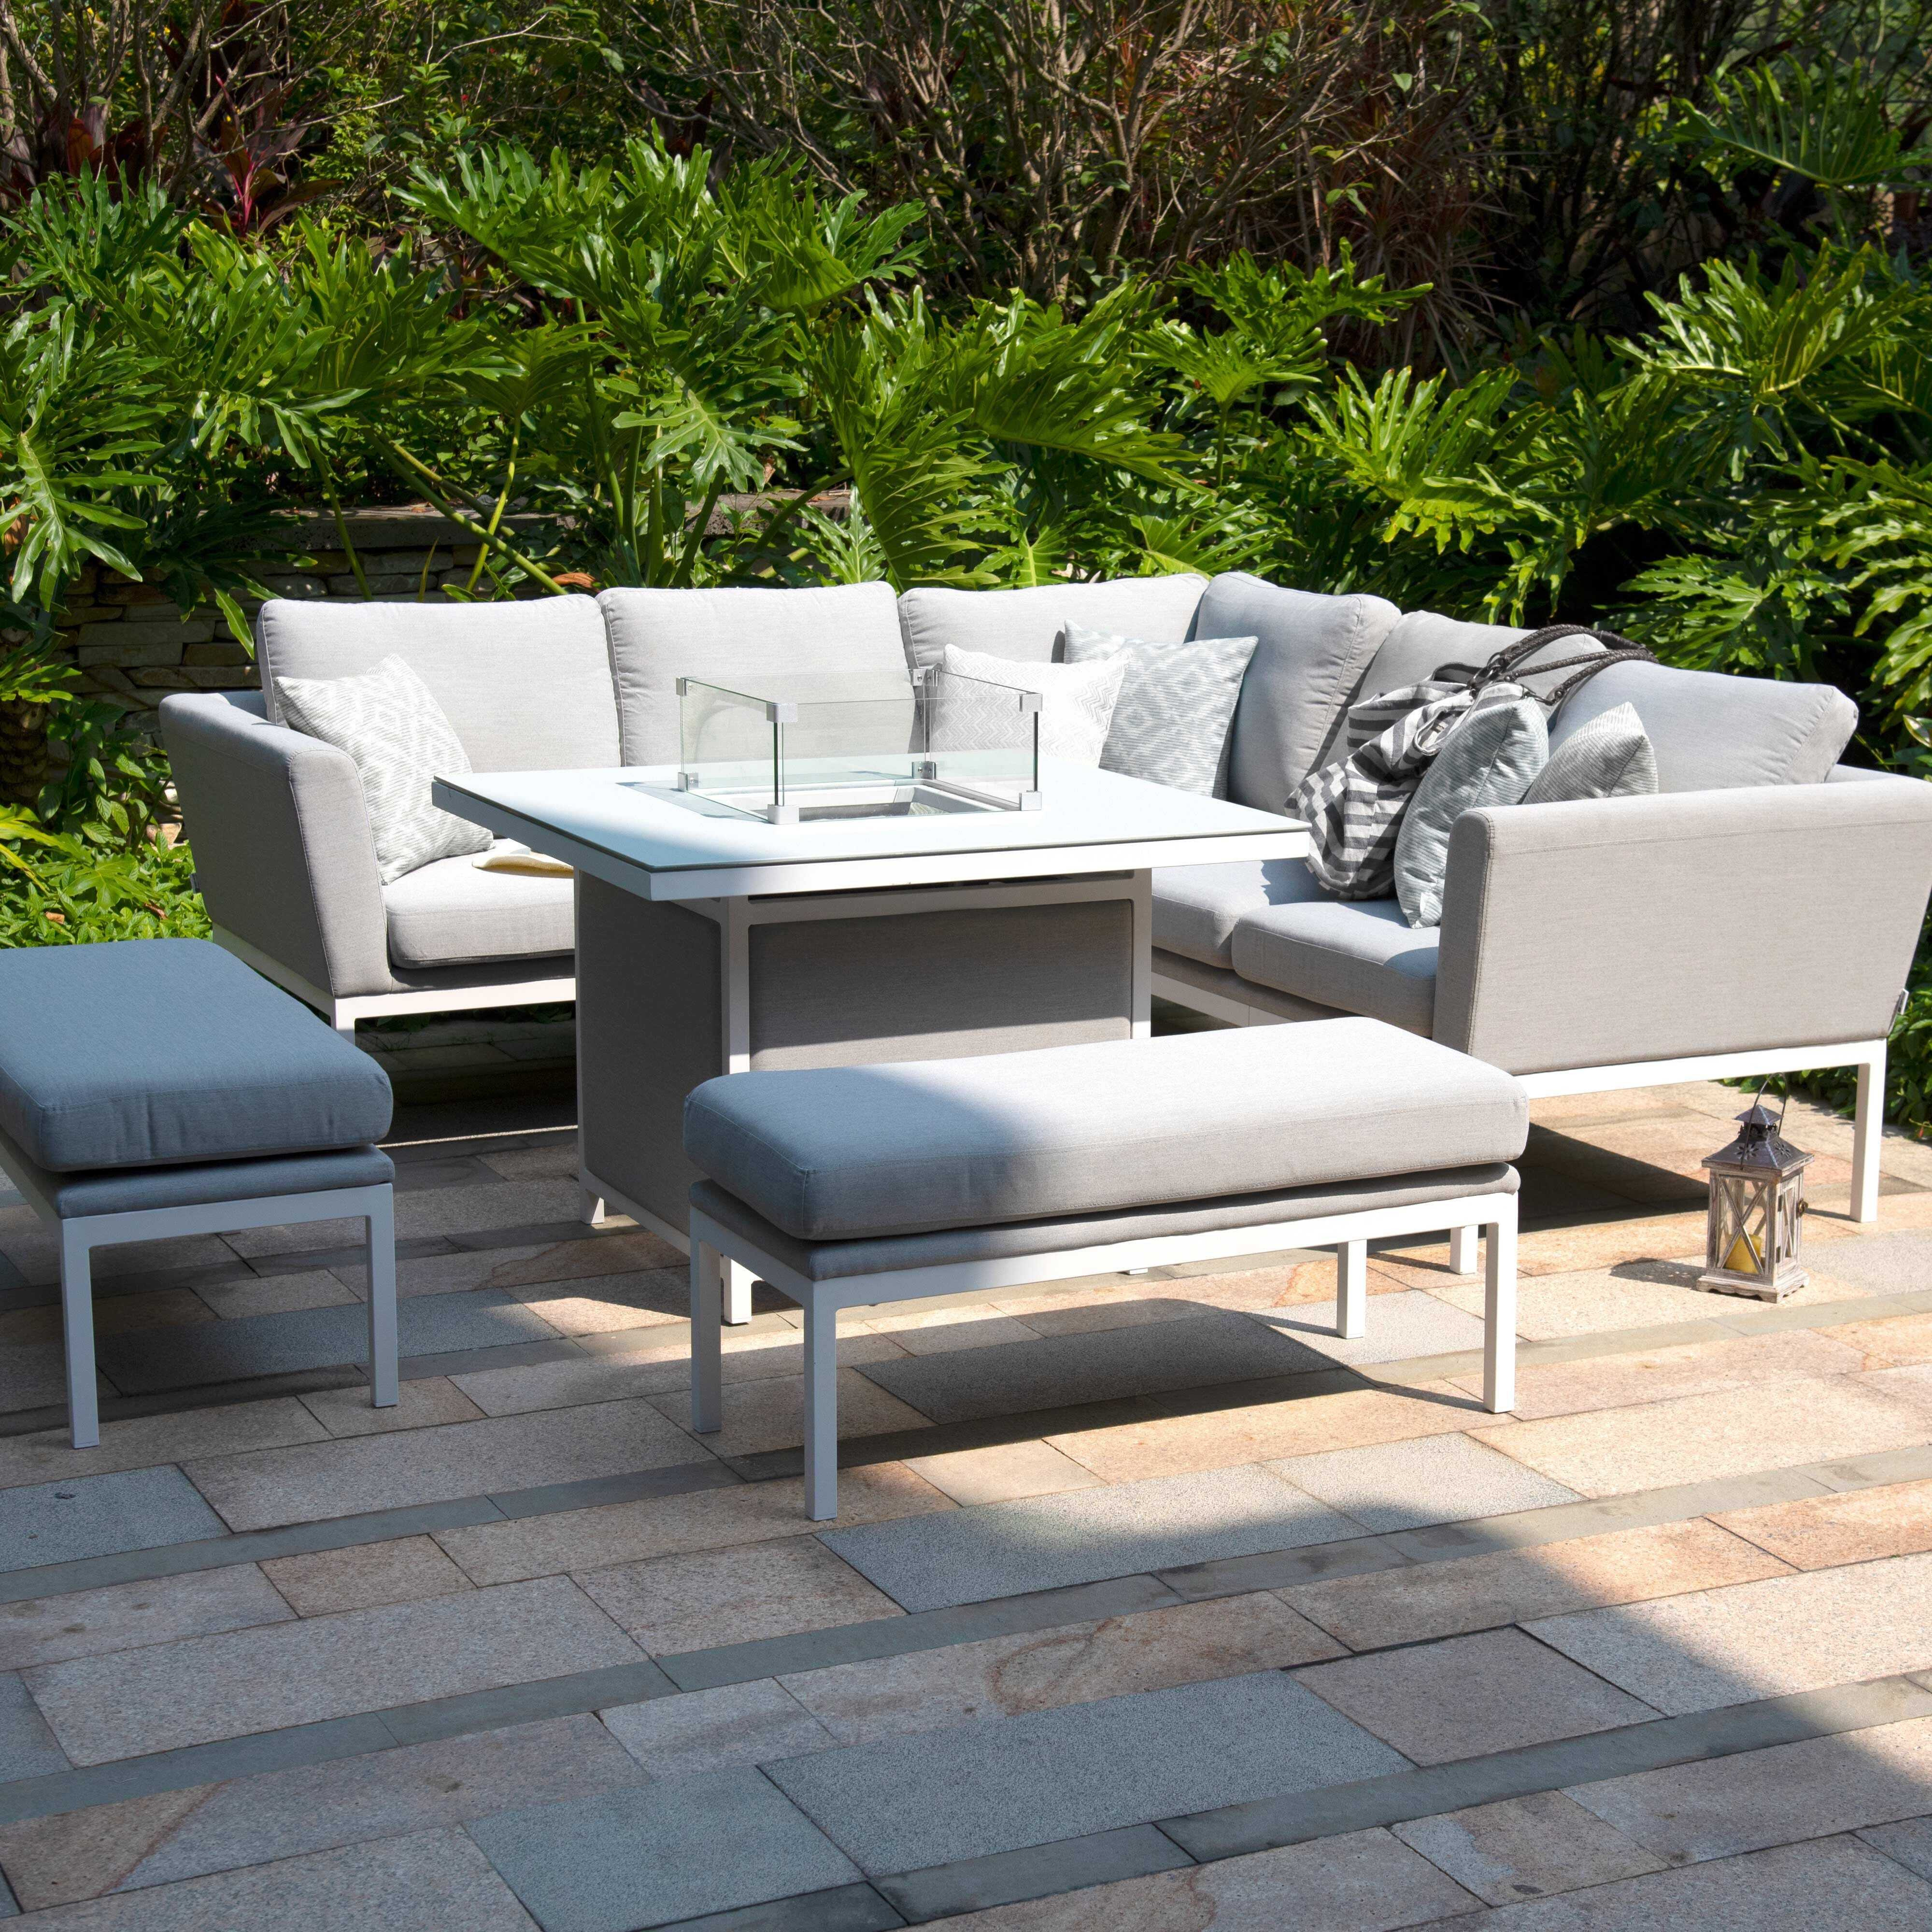 Maze Antalya Grey and White Square Corner Dining Set With Fire Pit Table